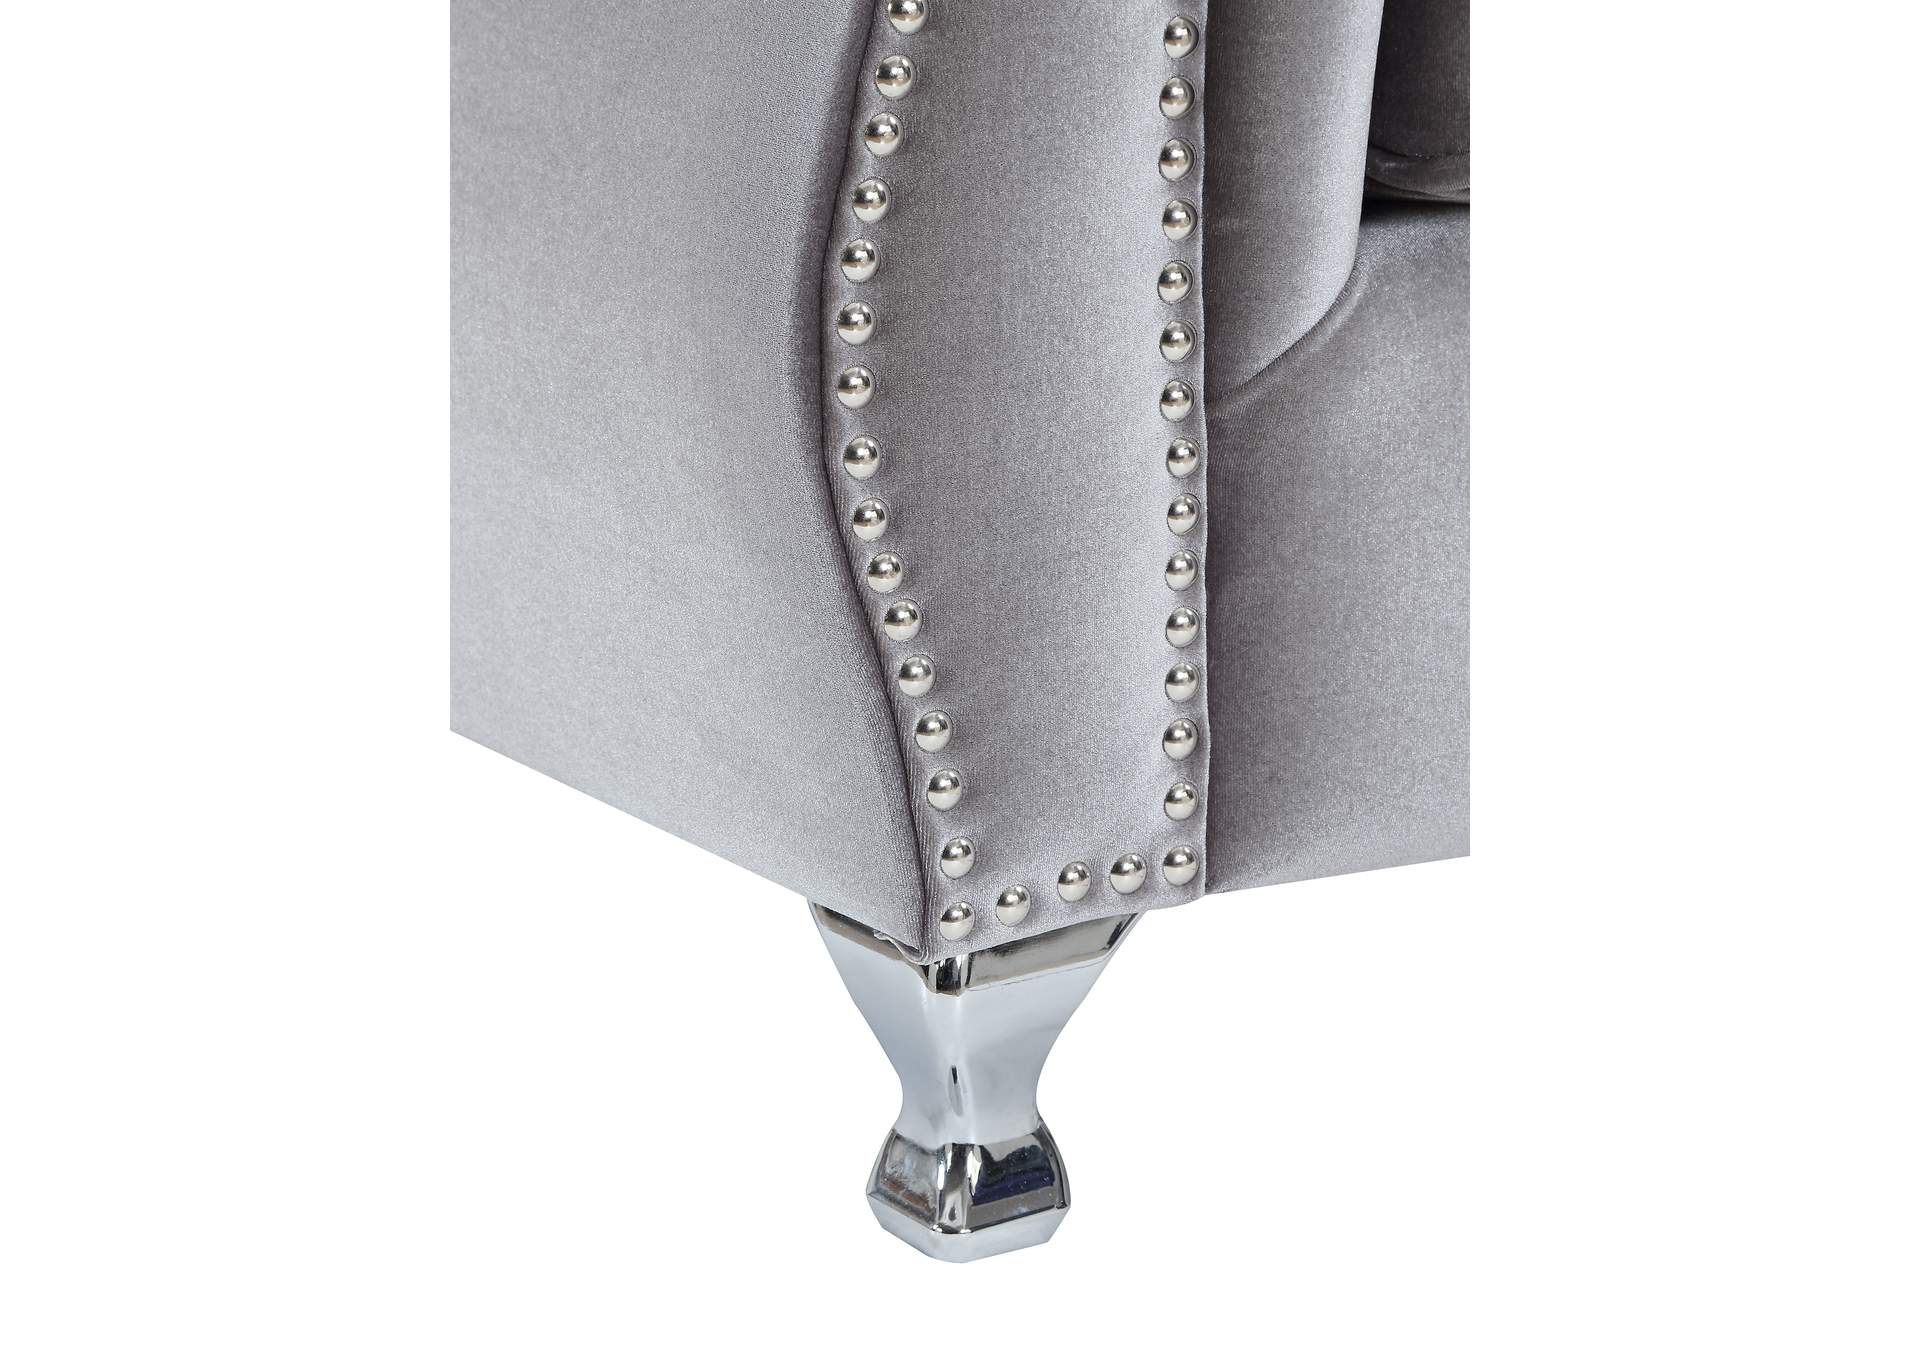 Frostine Button Tufted Chair Silver,Coaster Furniture